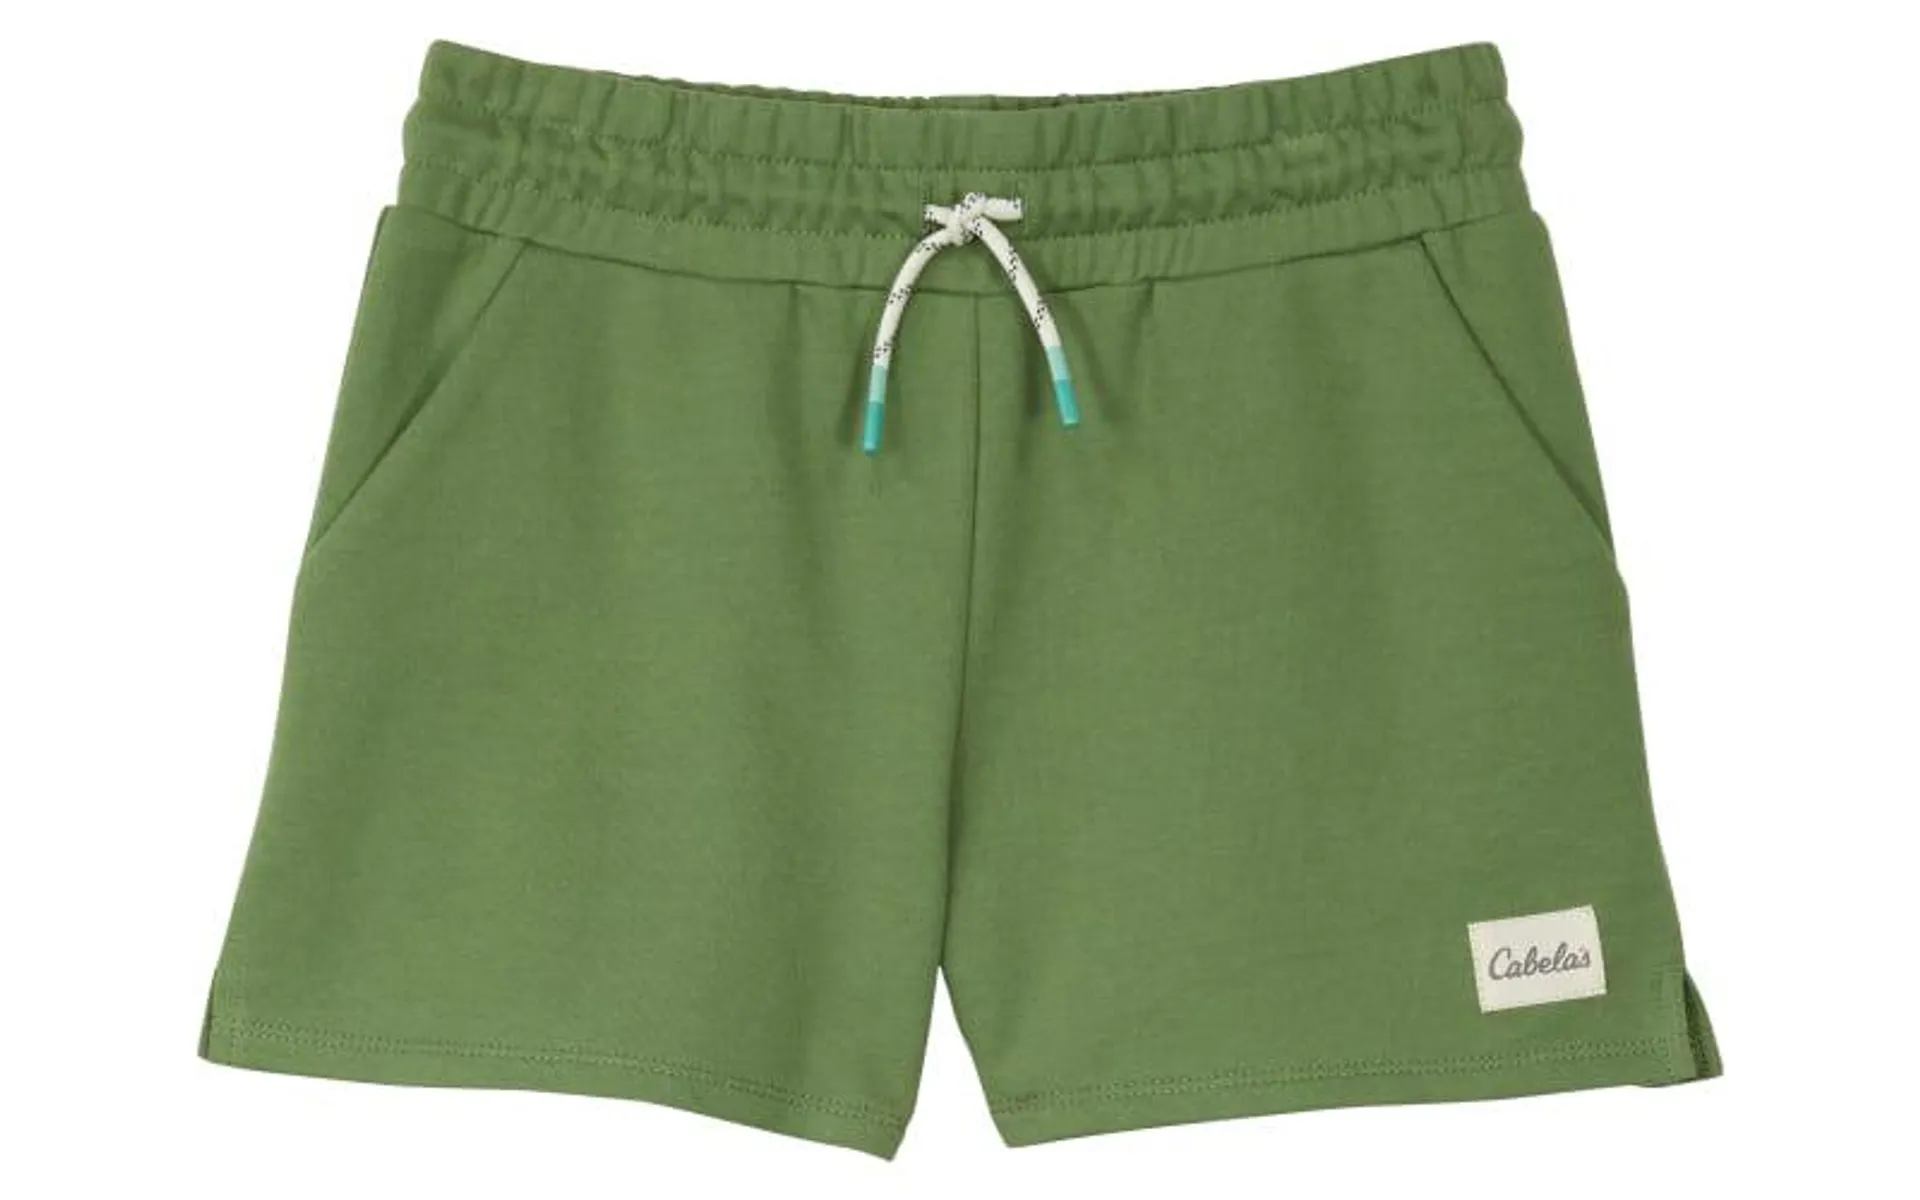 Cabela's Logo Terry Shorts for Toddlers or Kids